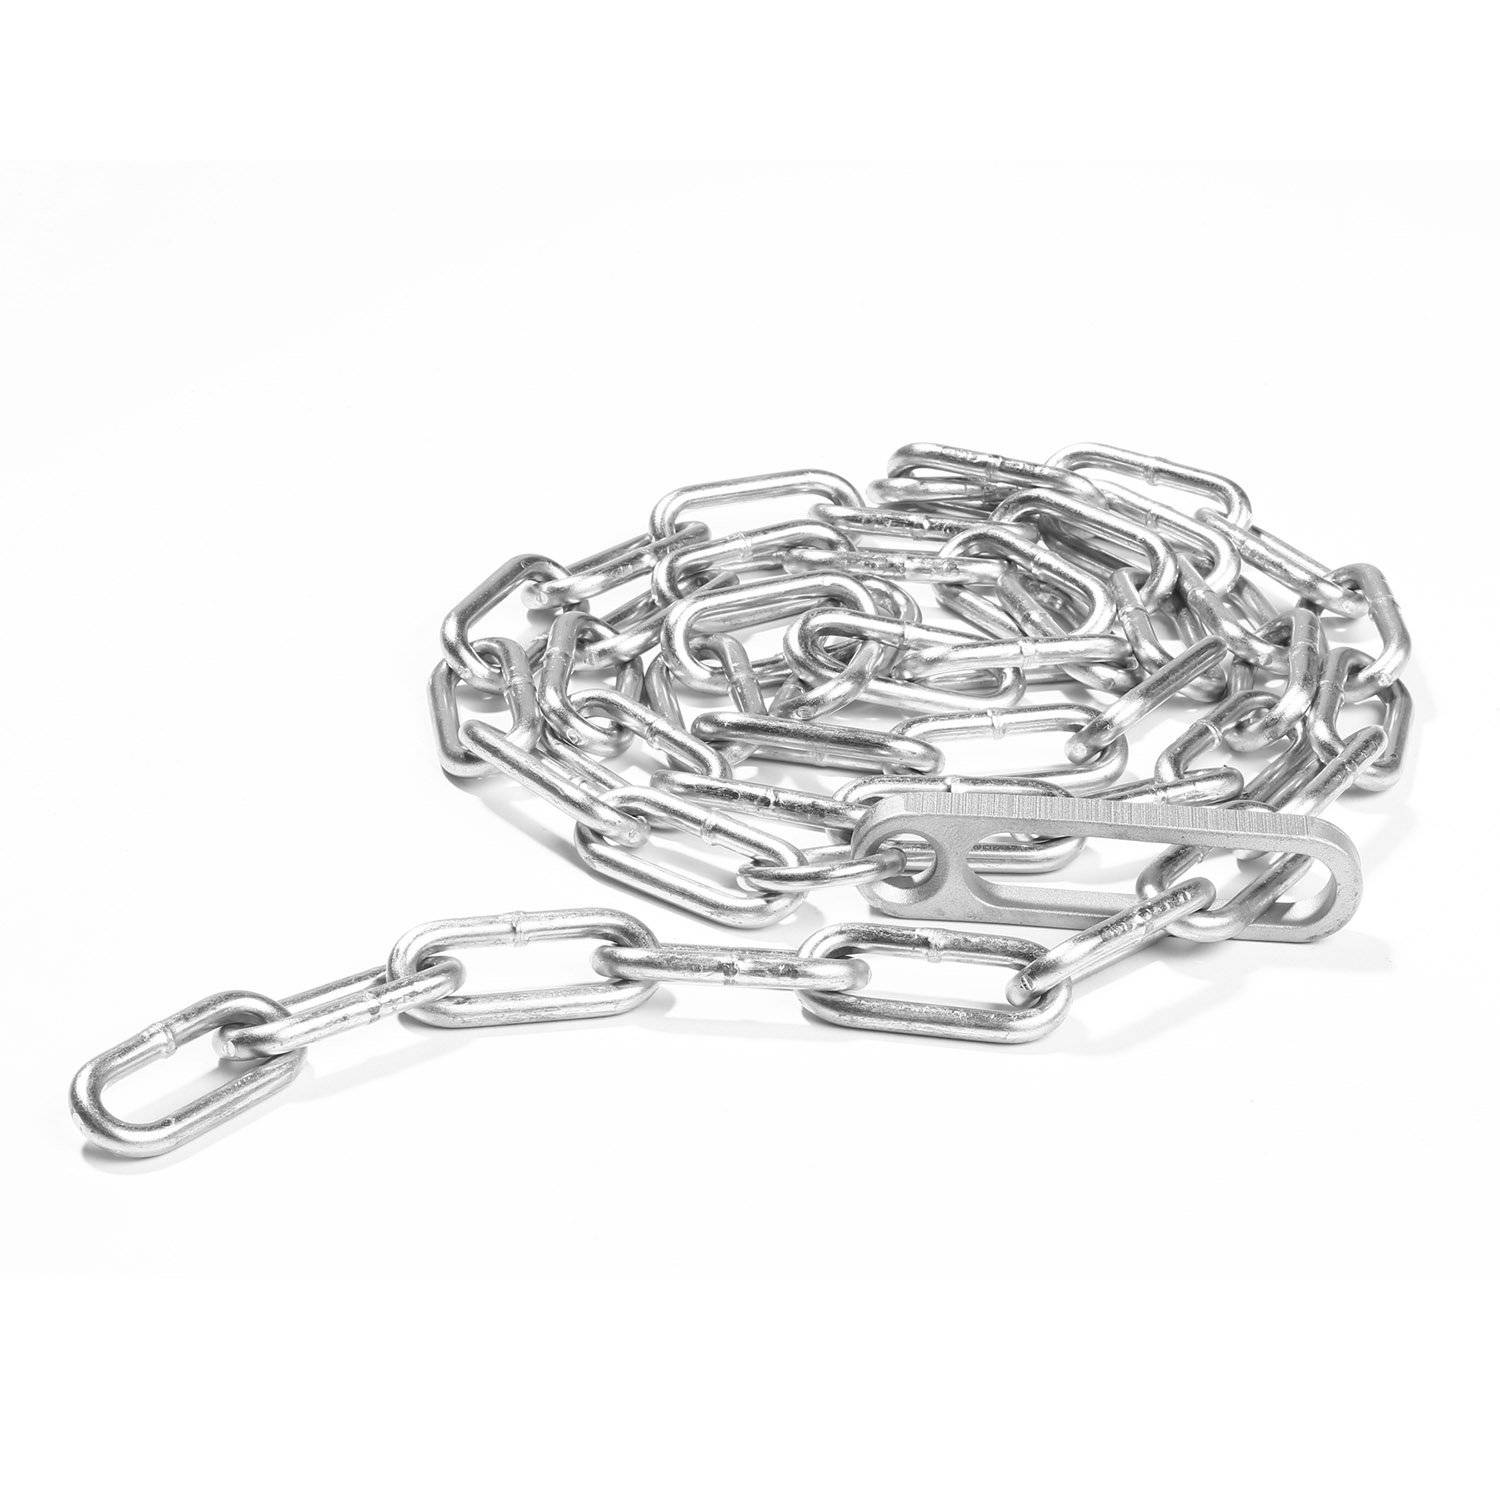 Smith & Wesson Model 1840 Restraint Chain